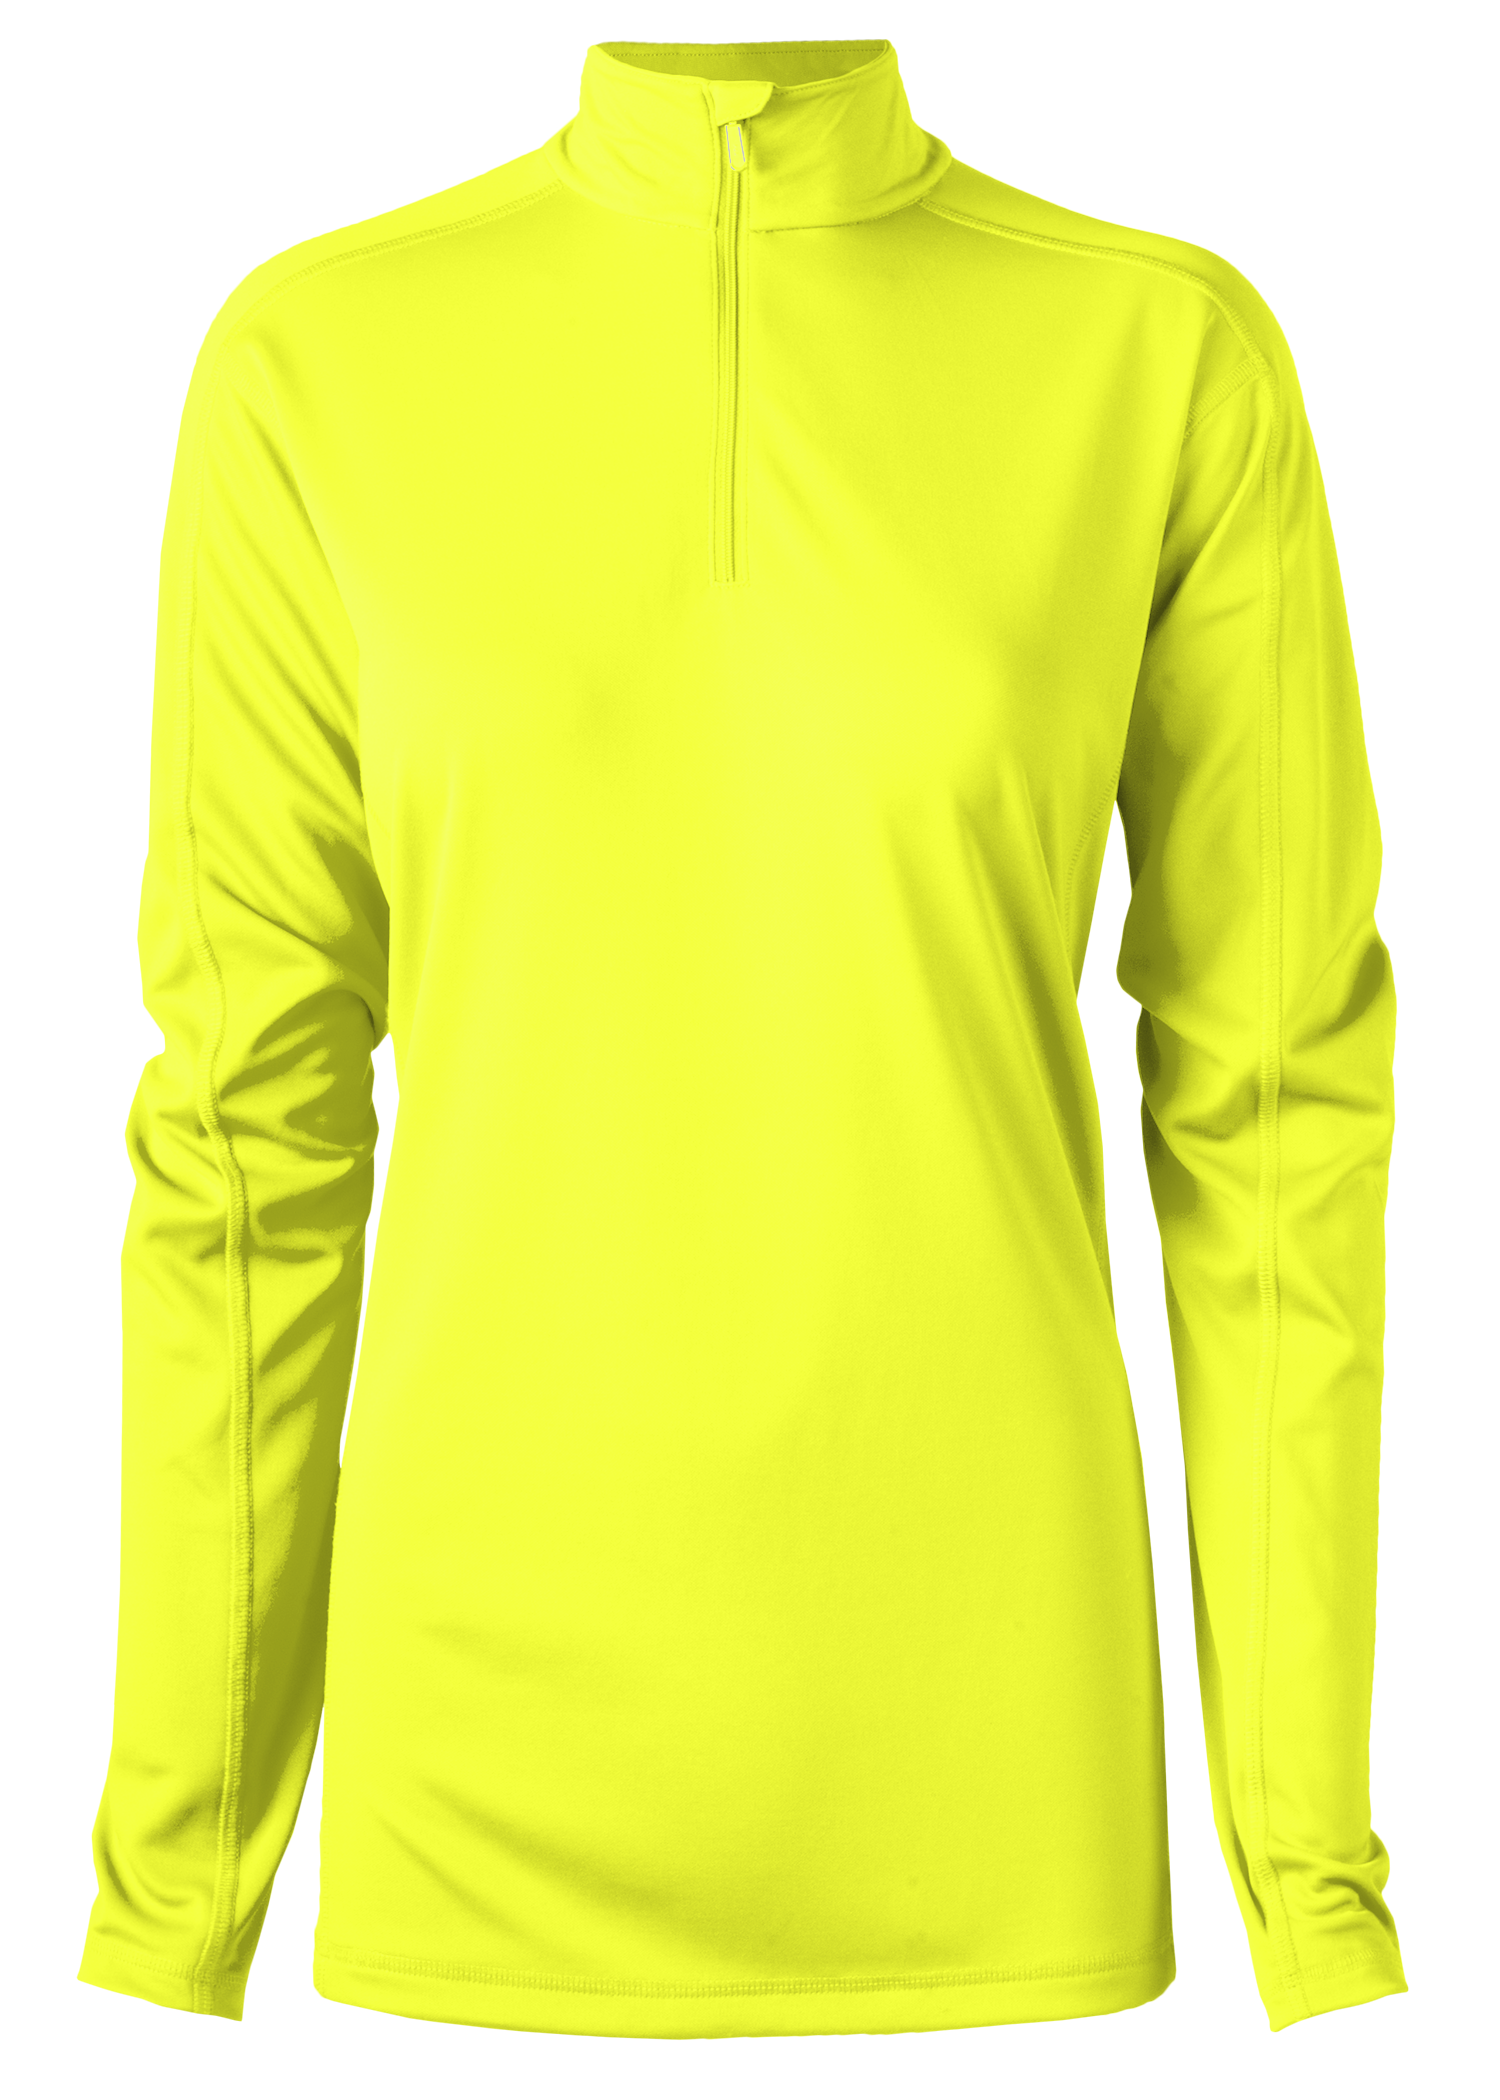 Z6562-Neon Yellow-FT.png